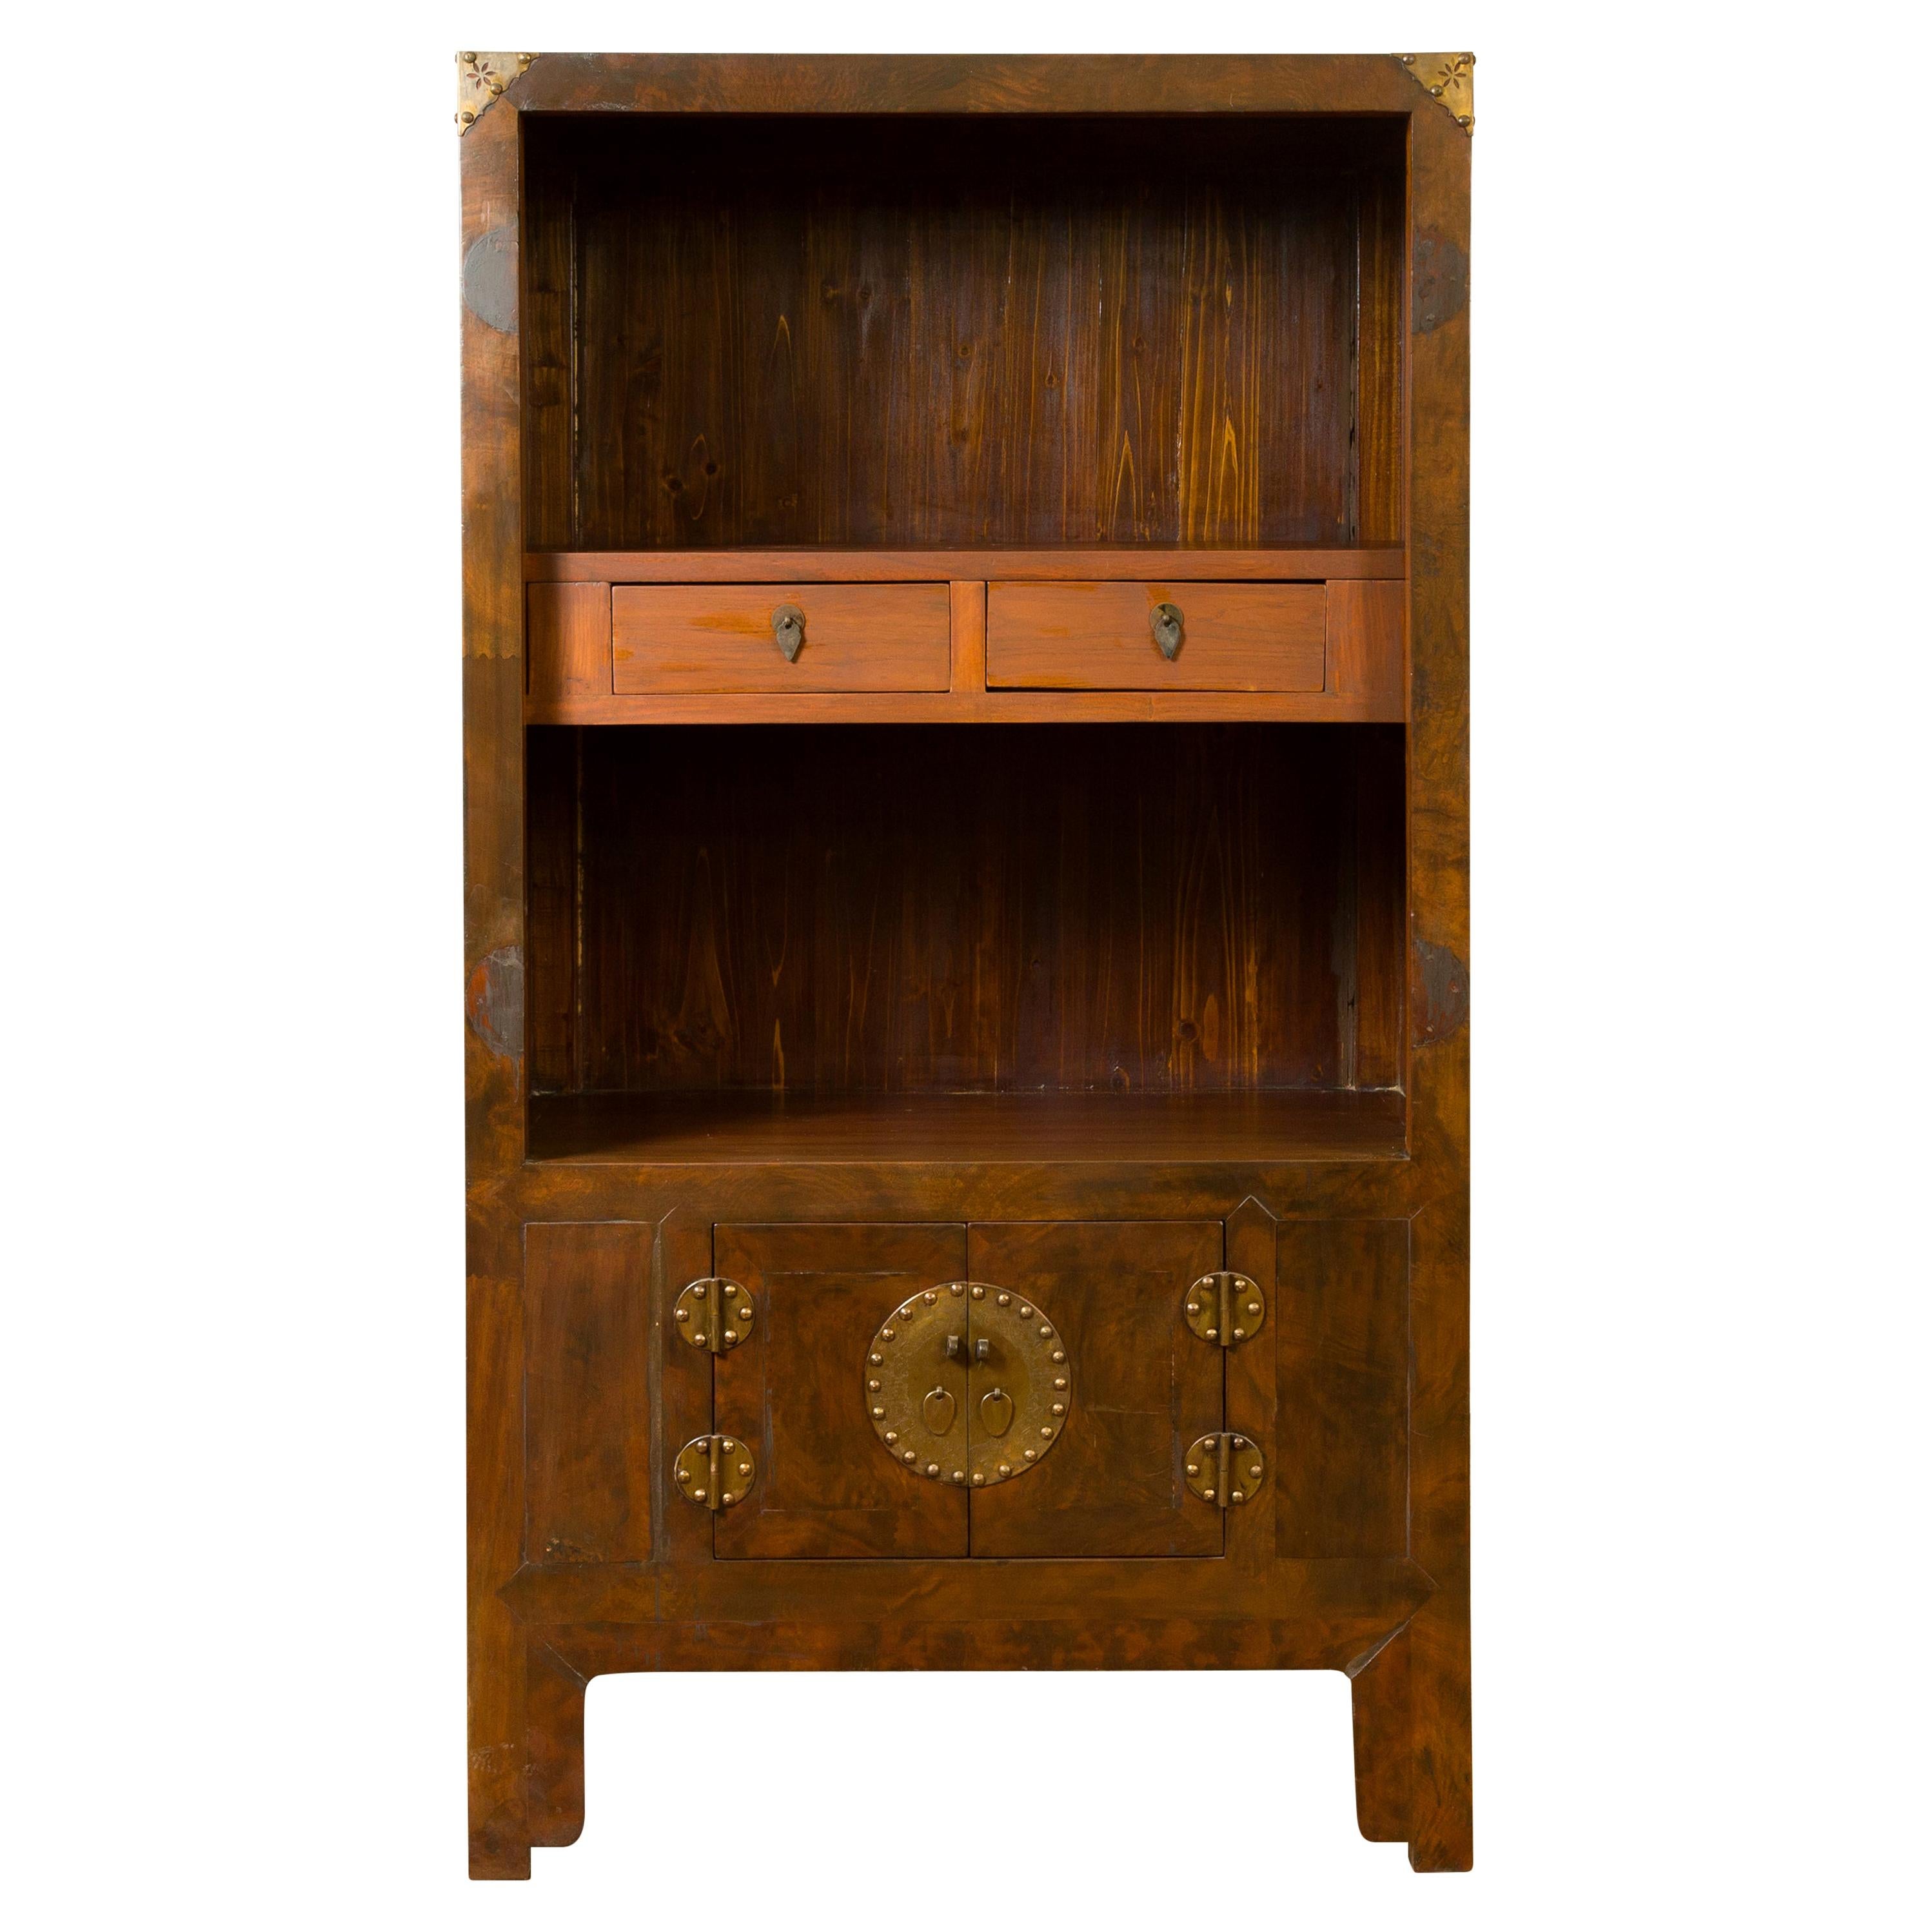 Chinese 19th Century Elmwood Bookcase with Doors, Drawers and Brass Hardware